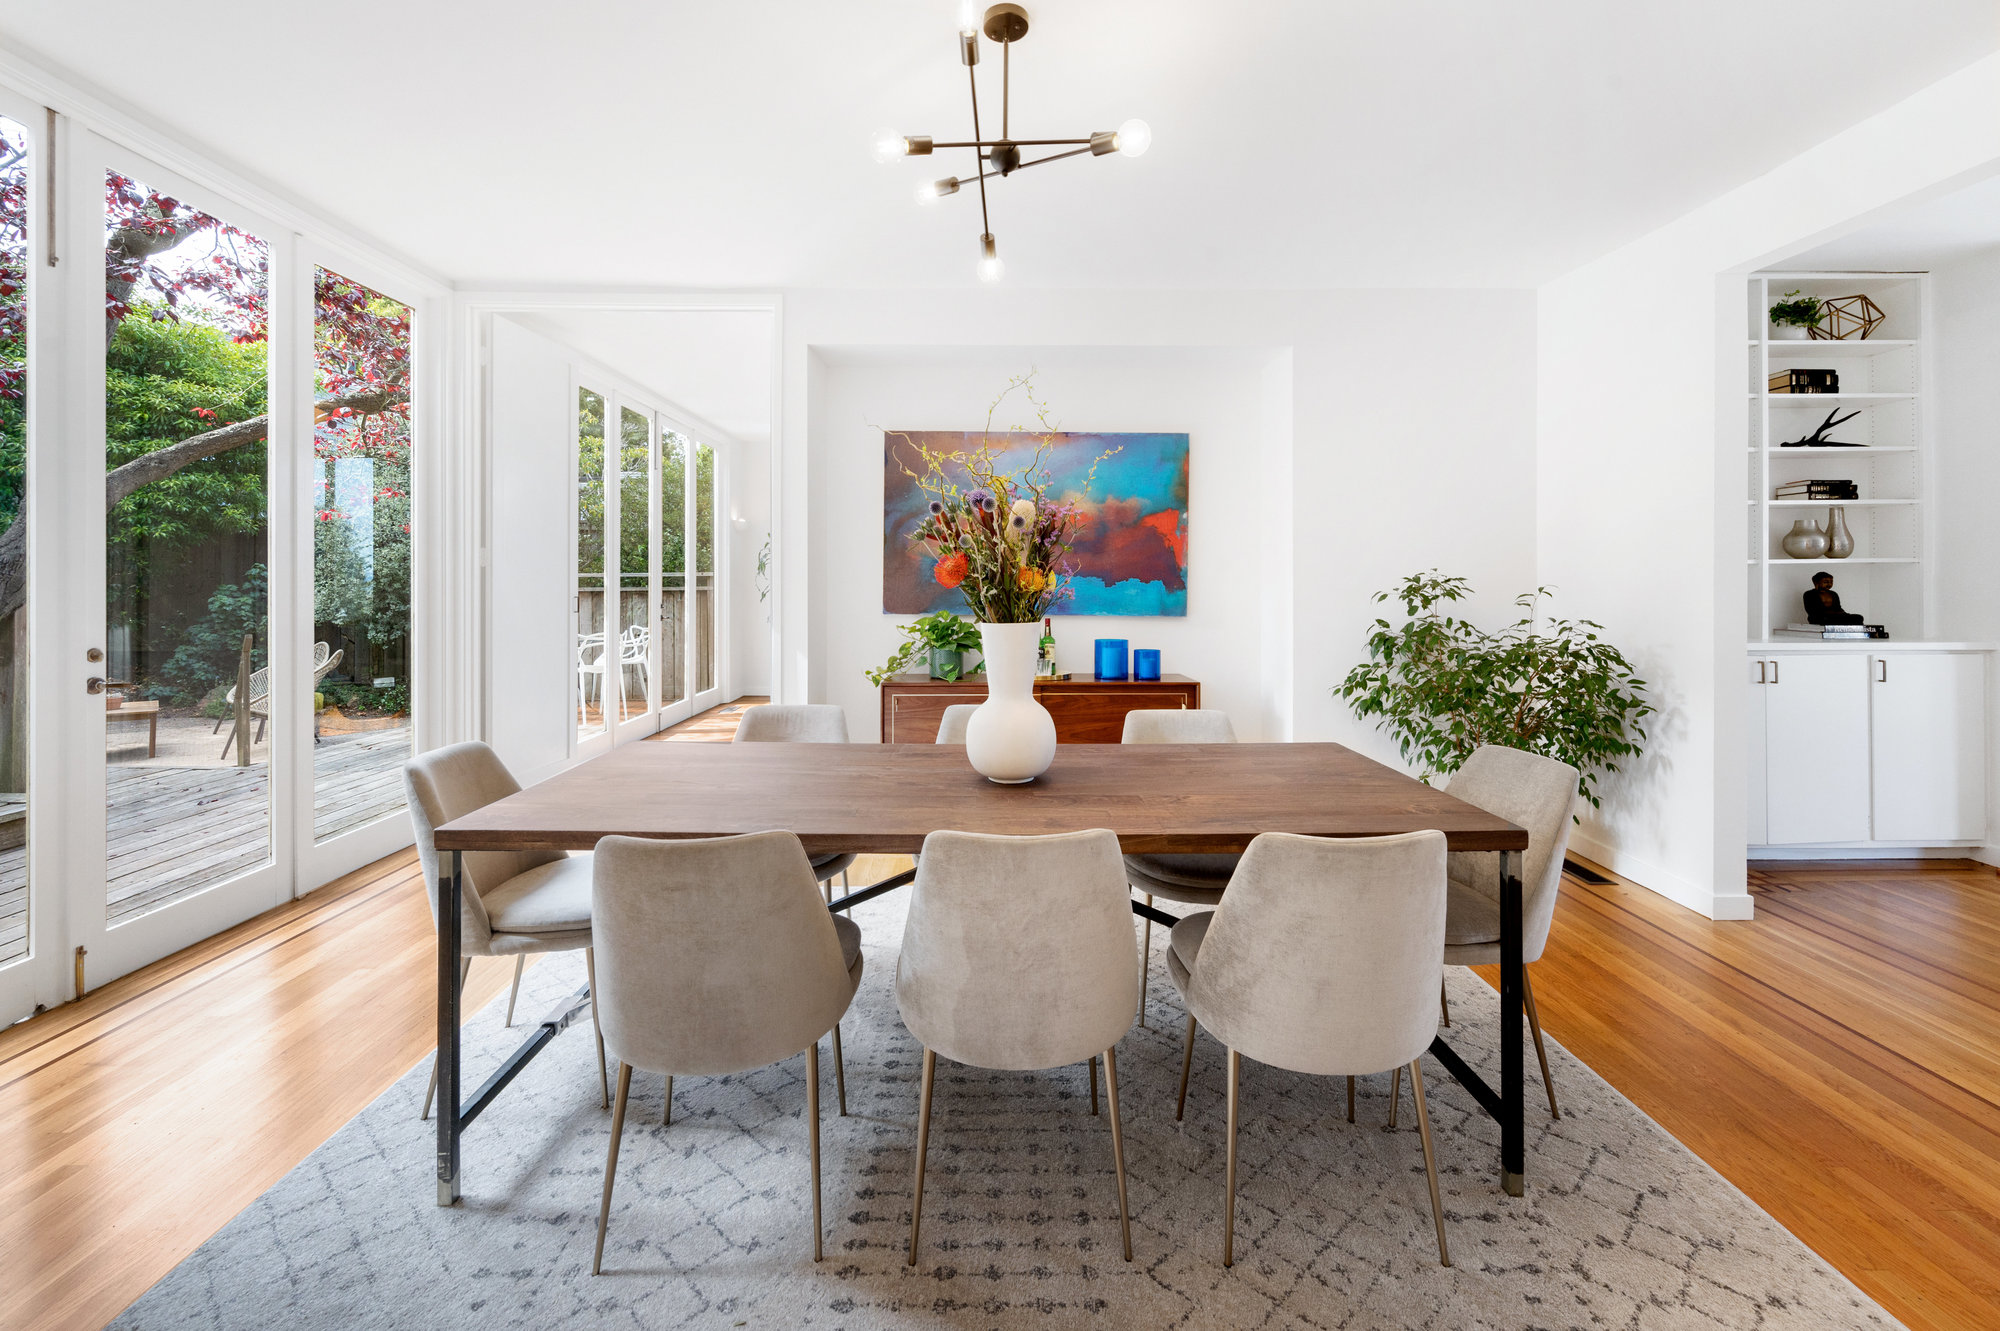 Property Photo: Formal dining room, with floor to ceiling windows and doors leading to the yard